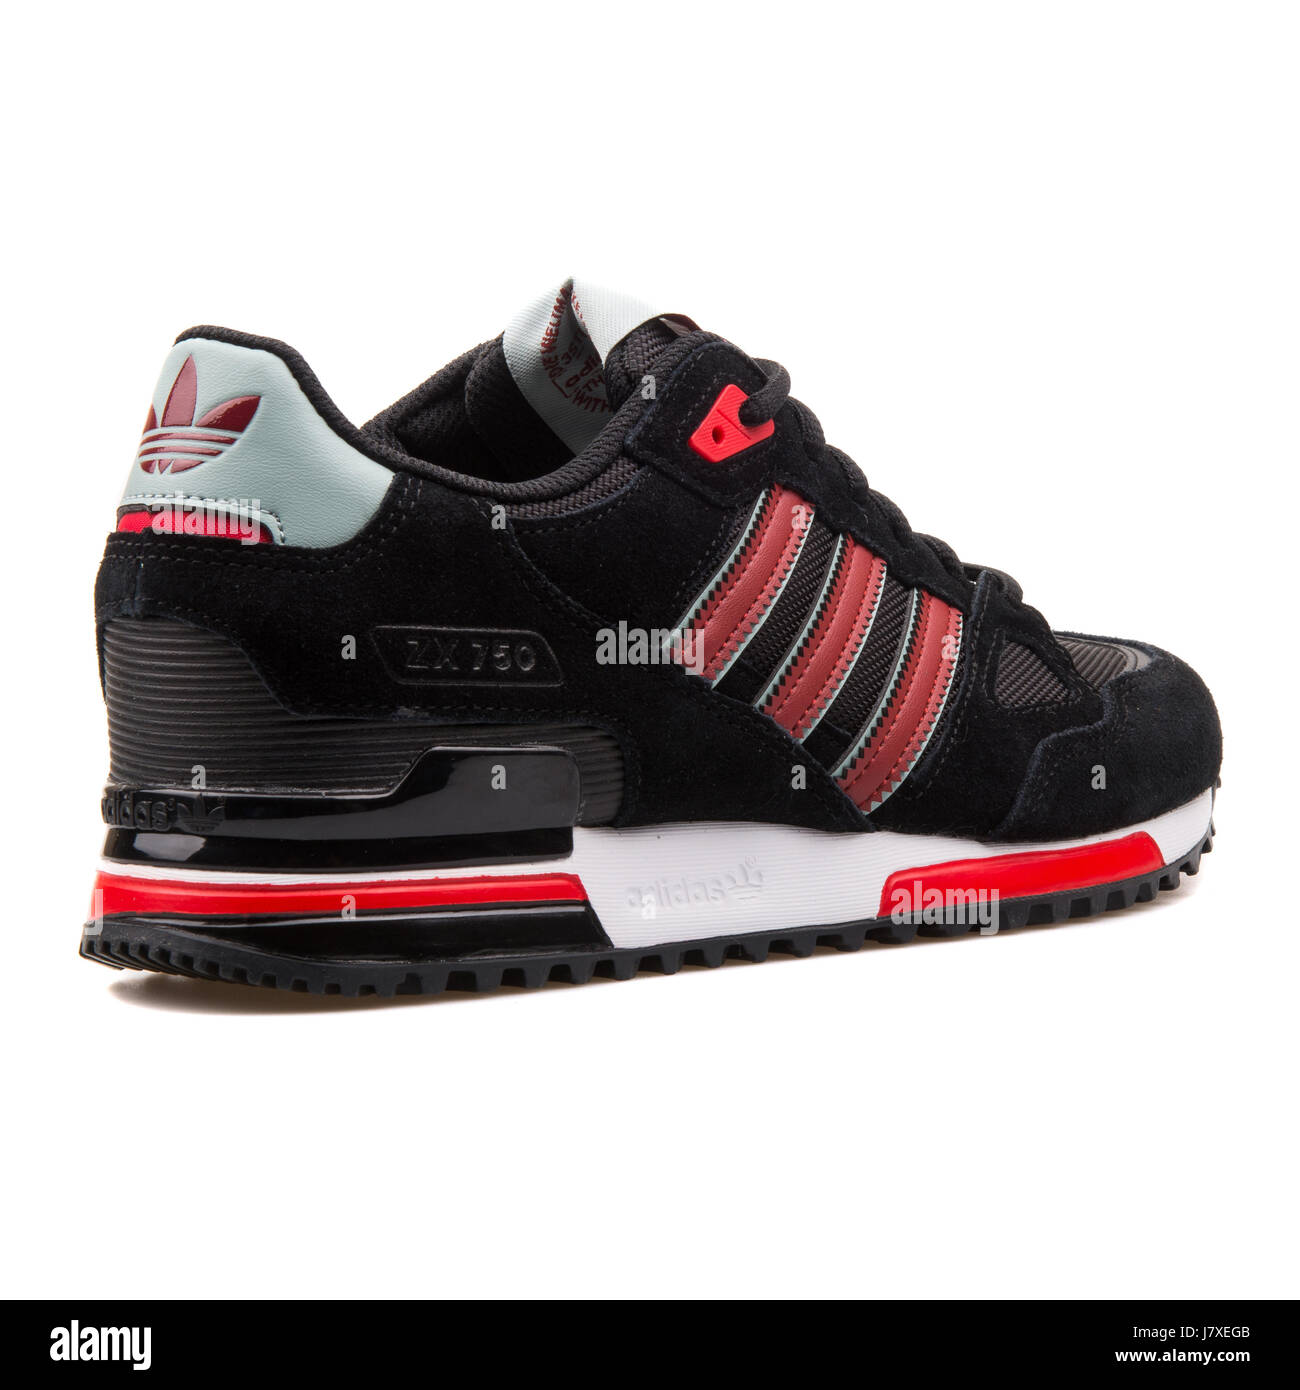 Adidas ZX 750 Men's black with Red Sneakers - B24856 Photo Stock - Alamy